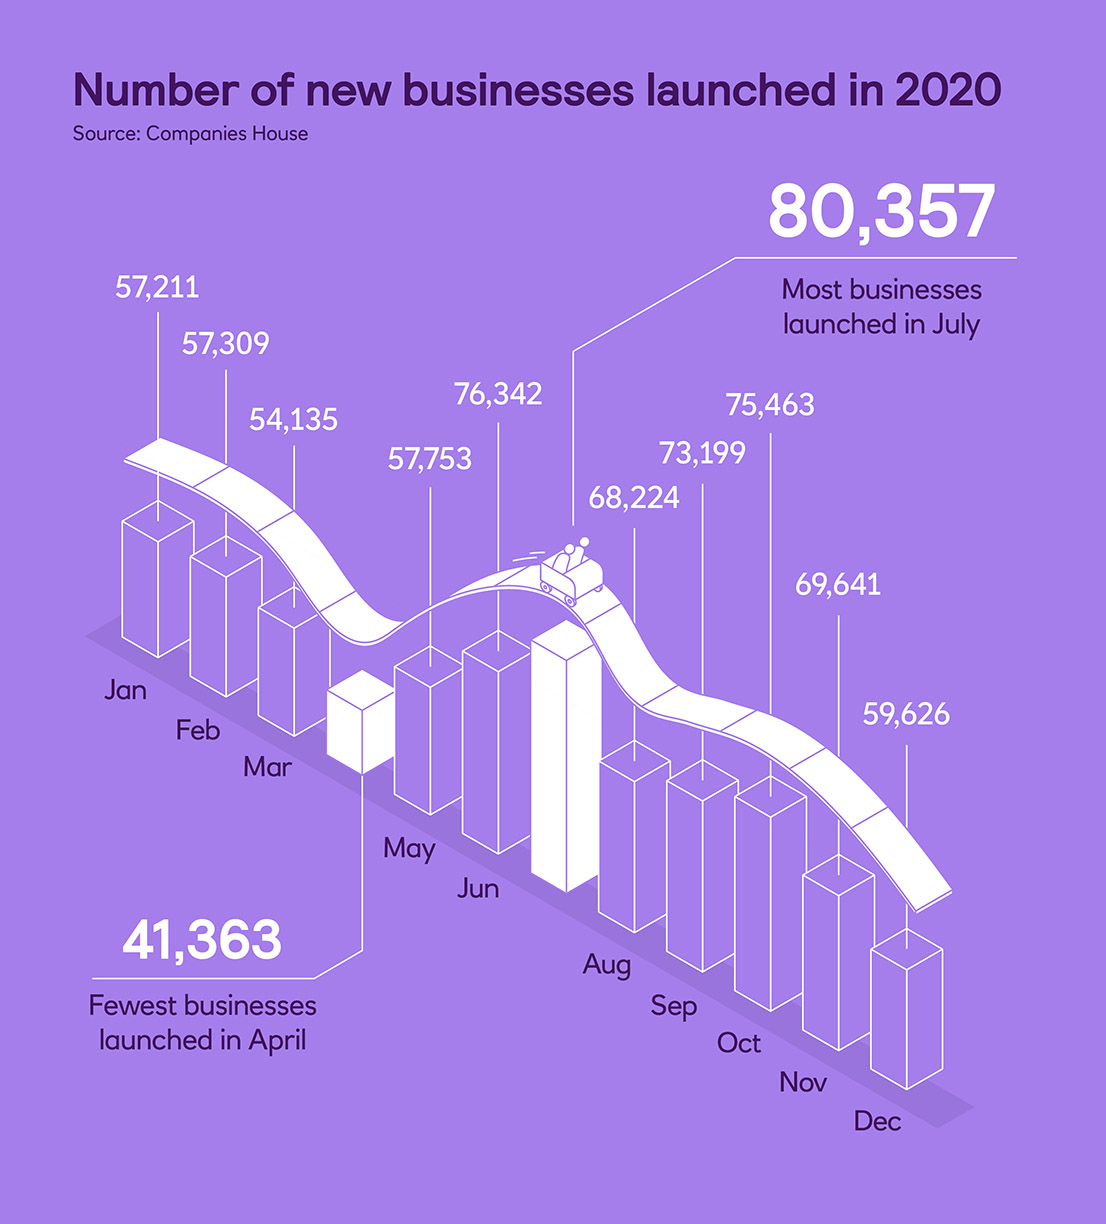 Number of new businesses launched in 2020